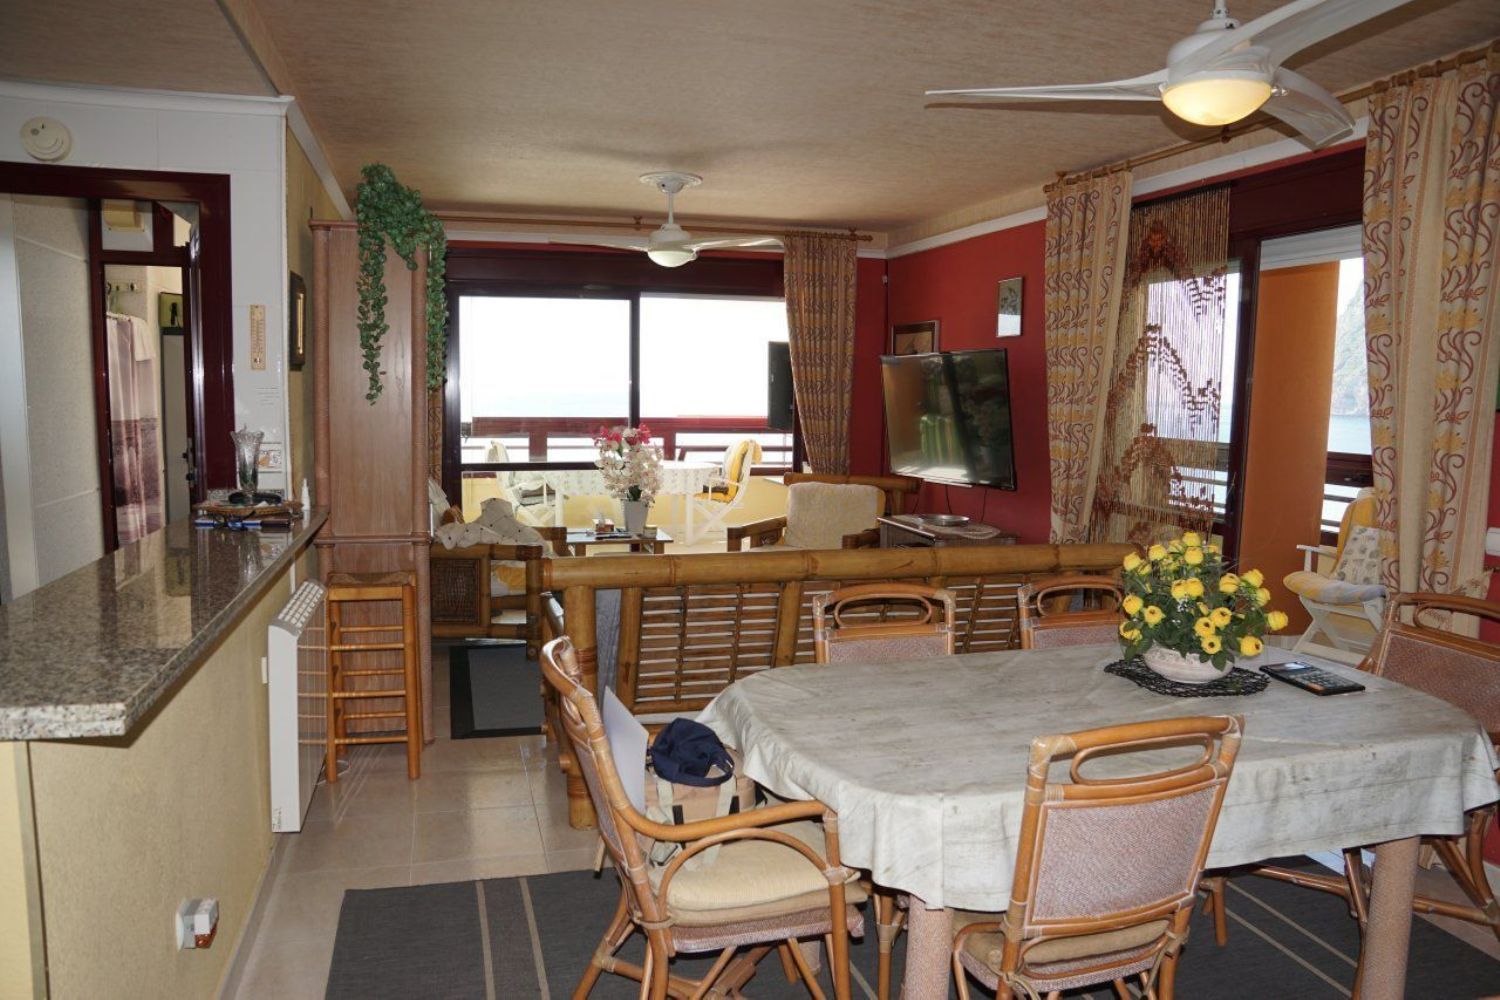 Apartment for sale on the seafront in Playa de Fossa-Levante, Calpe